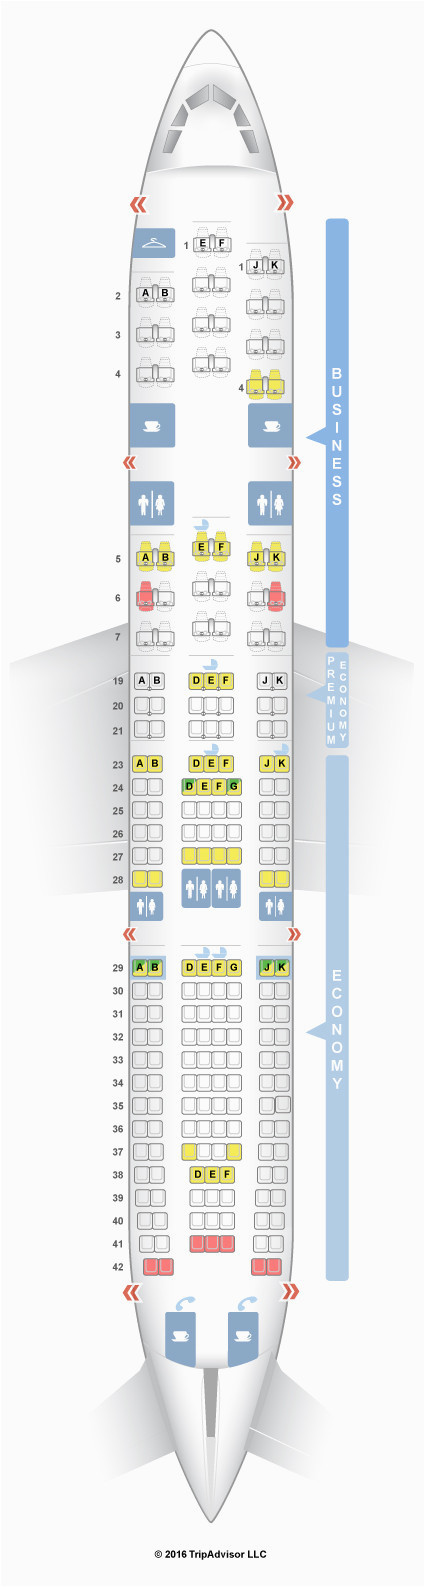 Air France Seat Maps American Airline Seating Chart Unique Seatguru Seat Map Air France